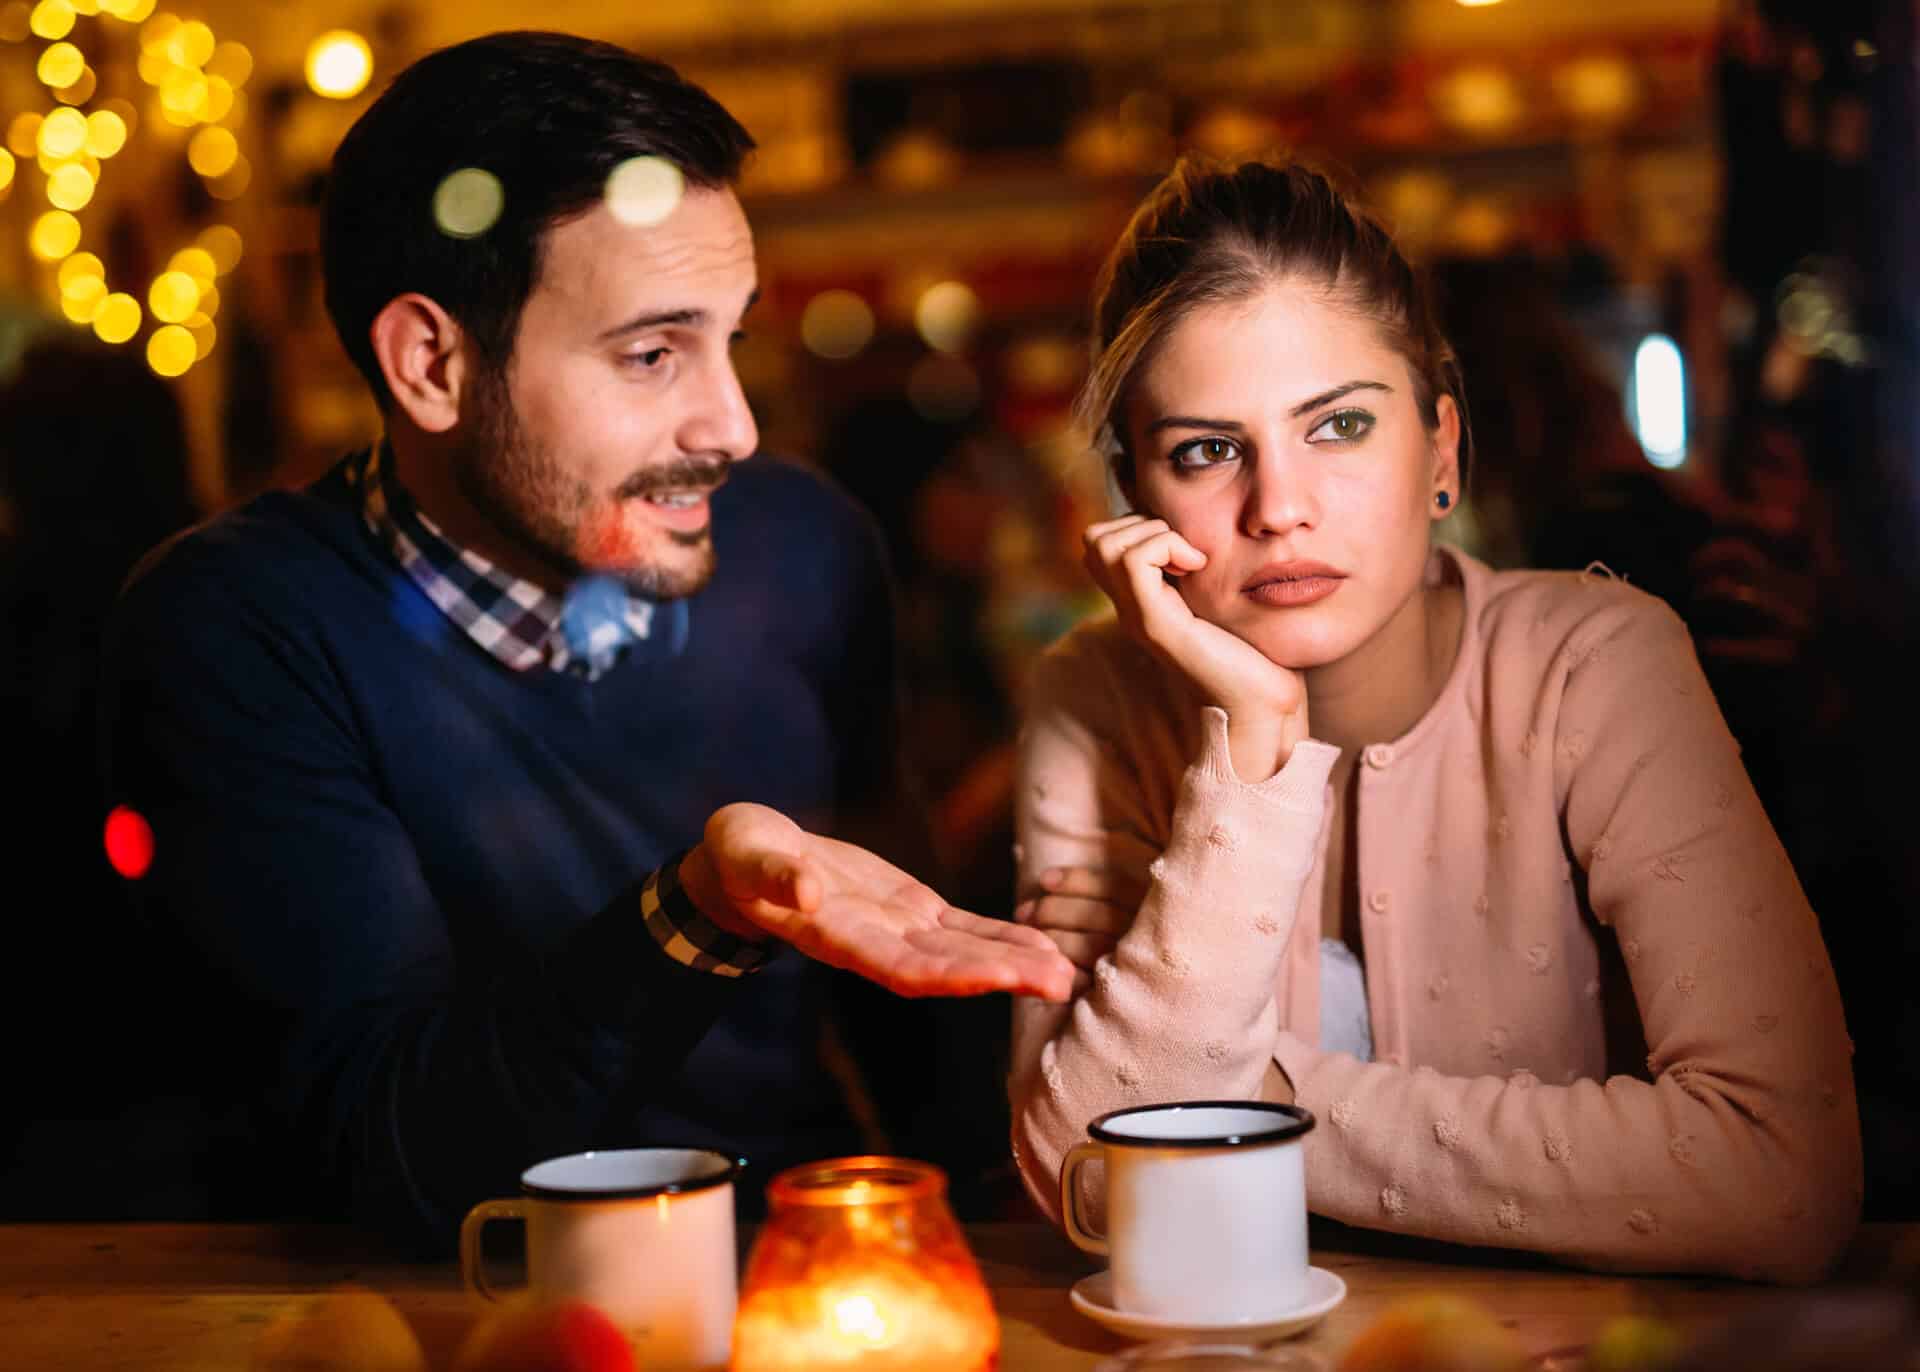 woman on a date not attracted to a man